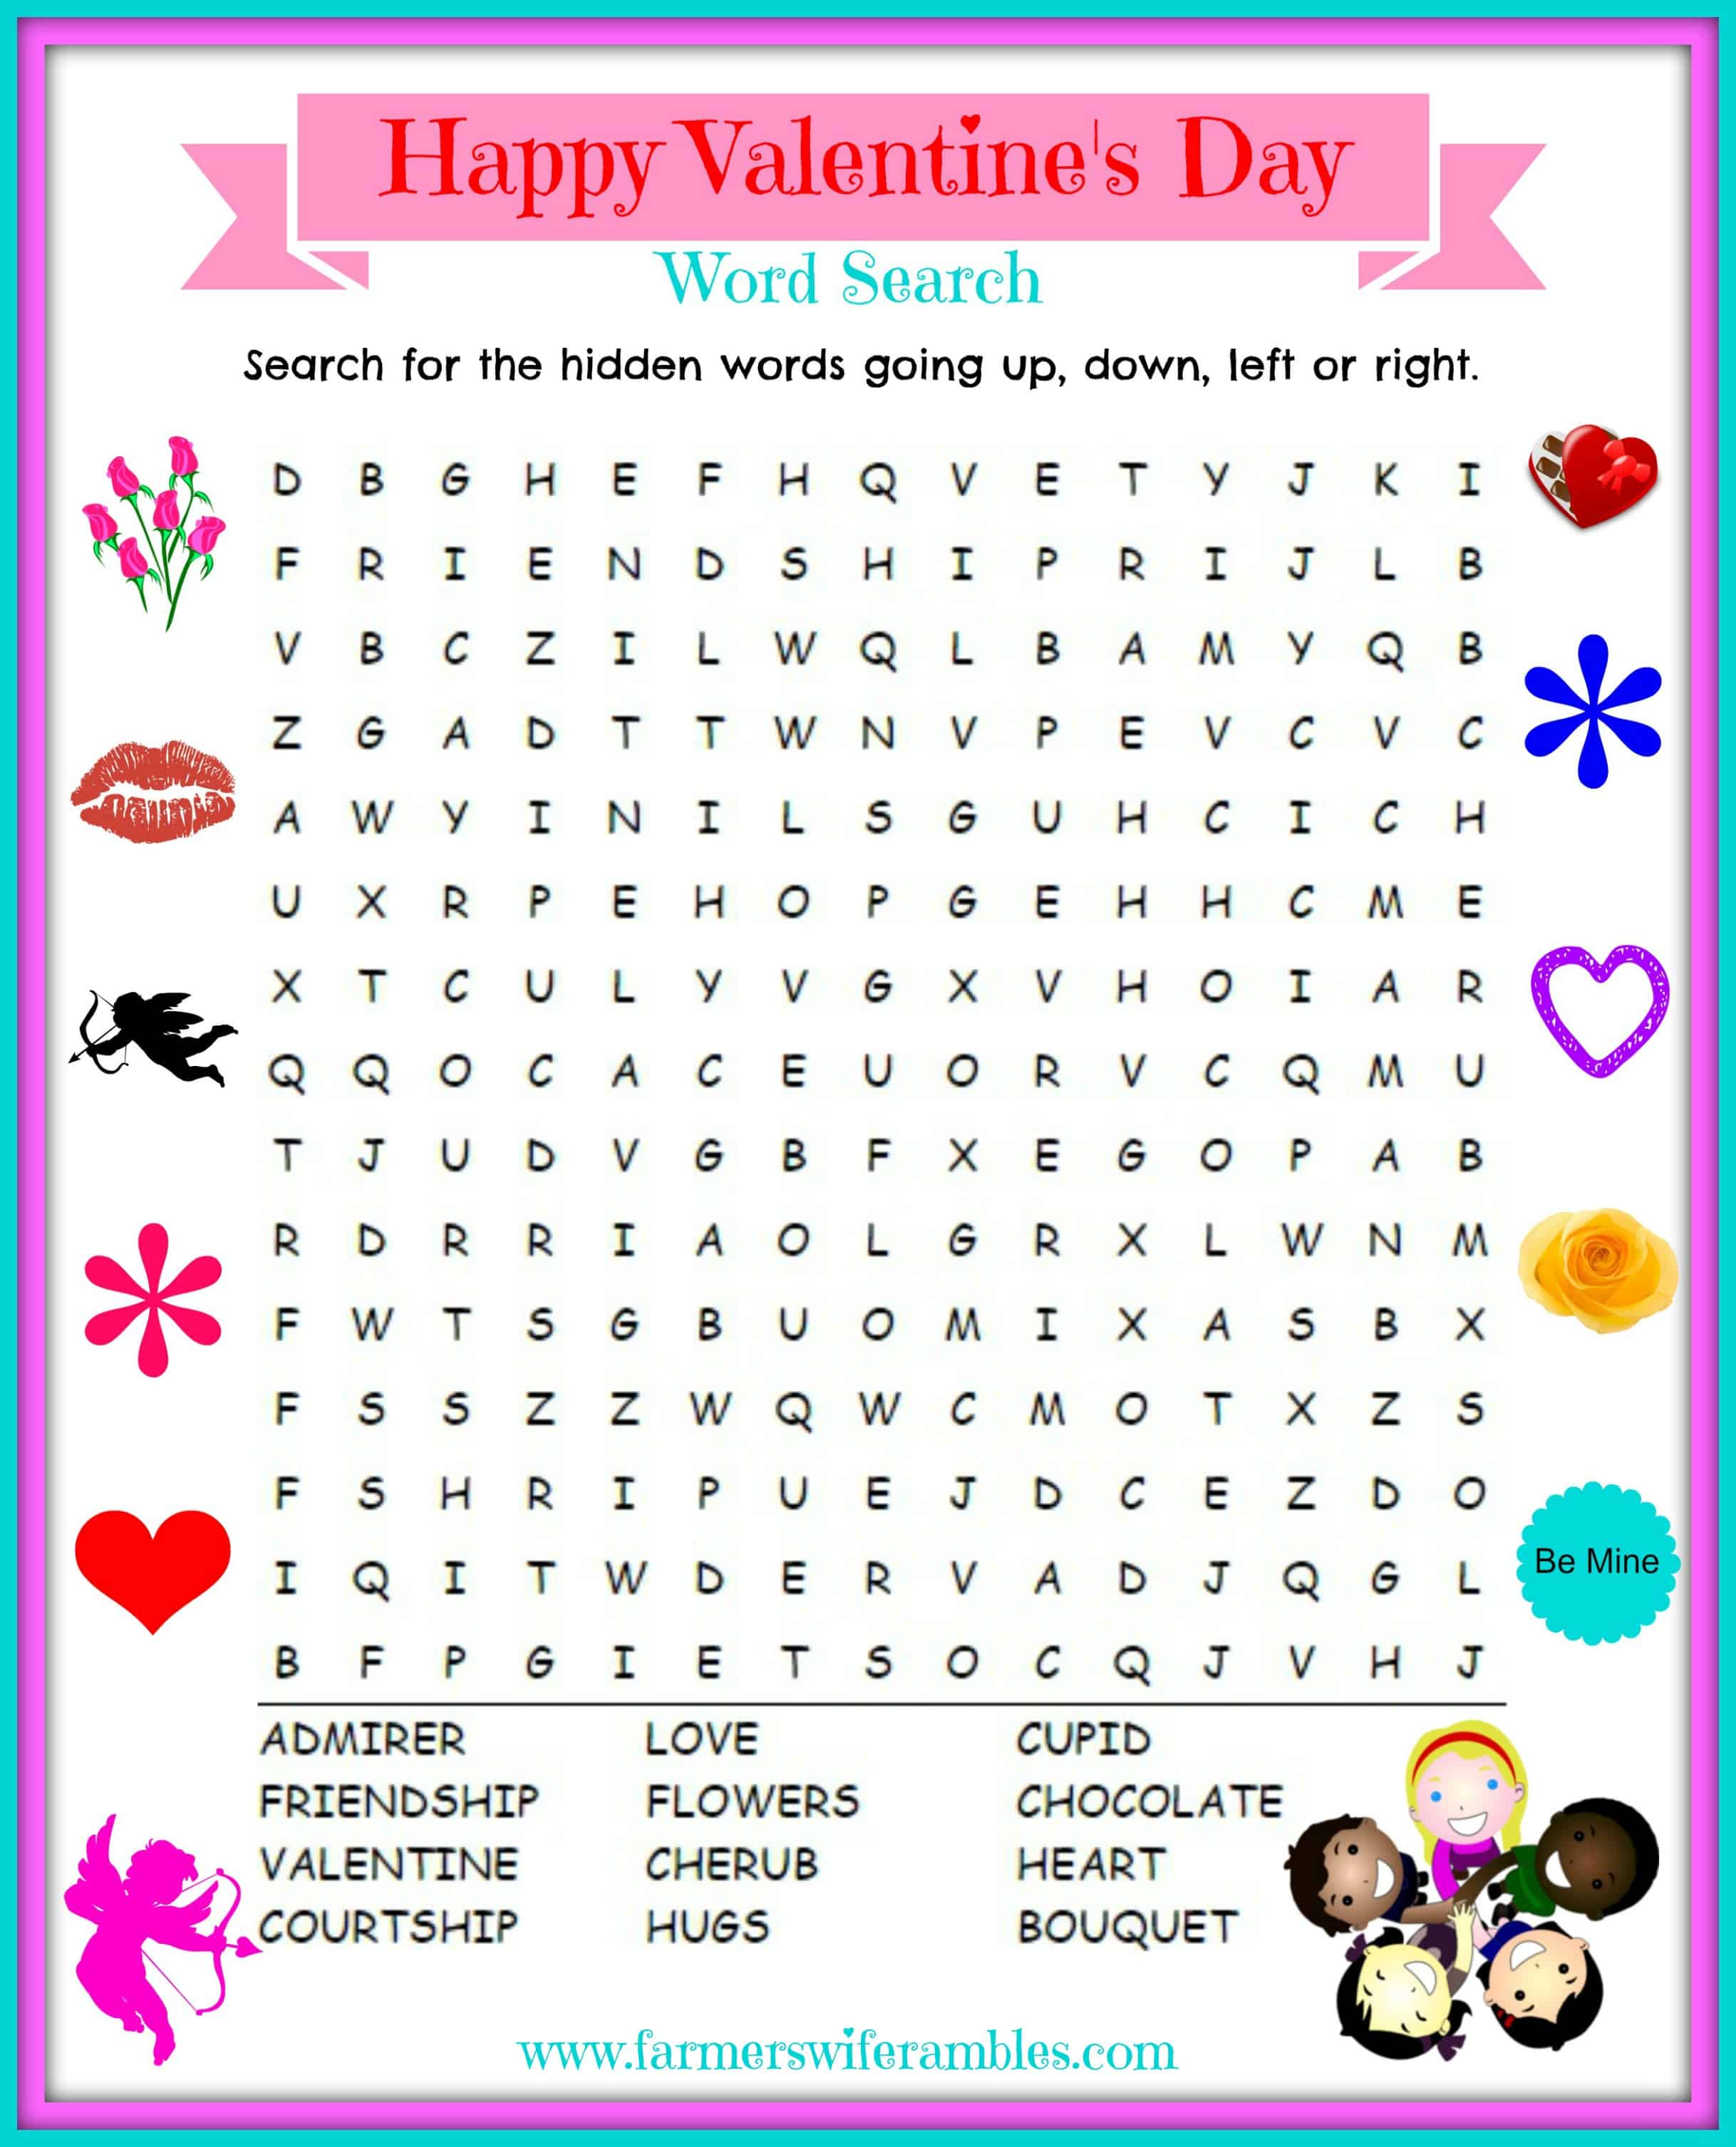 Valentines Day Printable Wordsearch Farmer's Wife Rambles